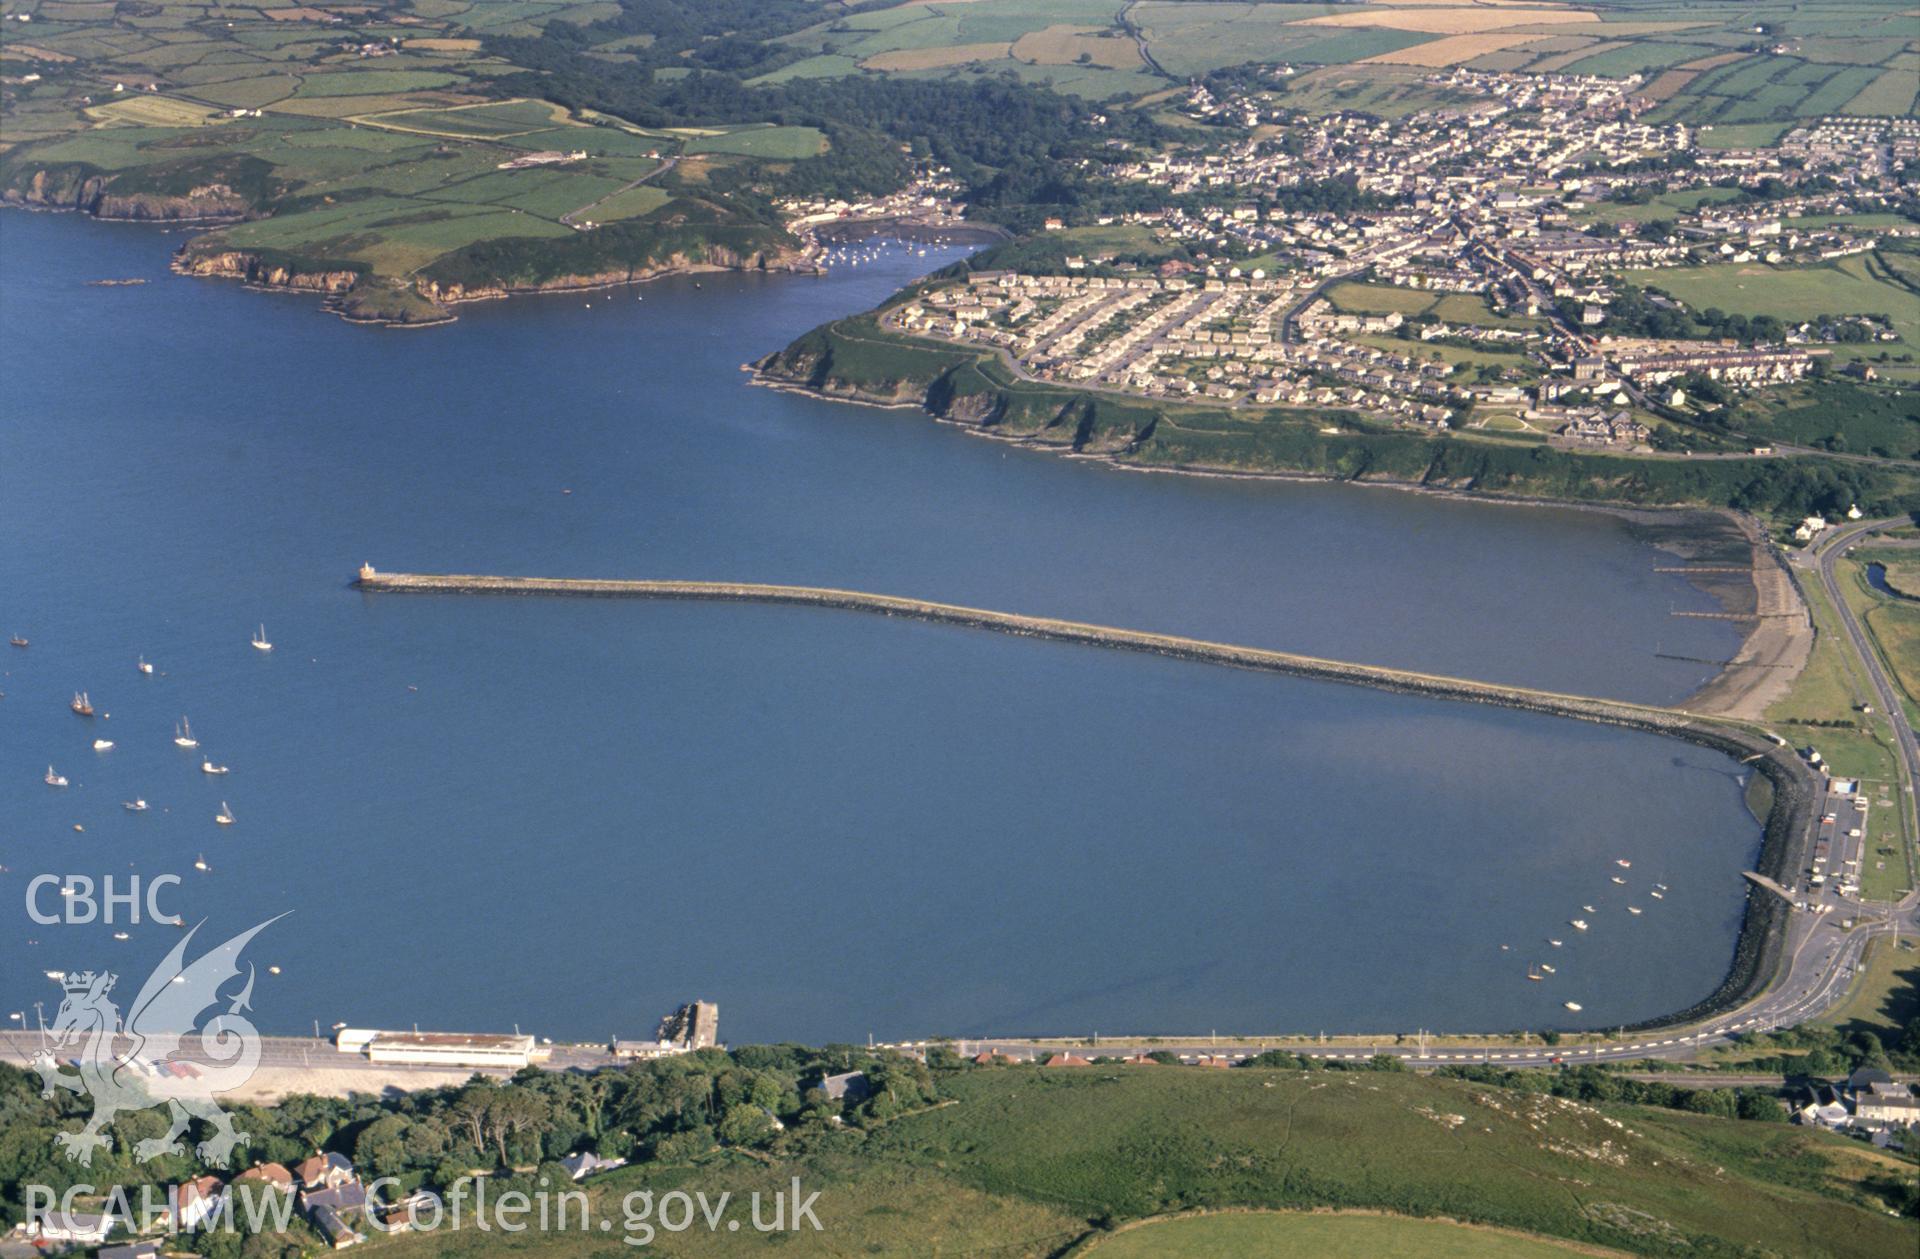 Slide of RCAHMW colour oblique aerial photograph of Fishguard, taken by C.R. Musson, 1990.